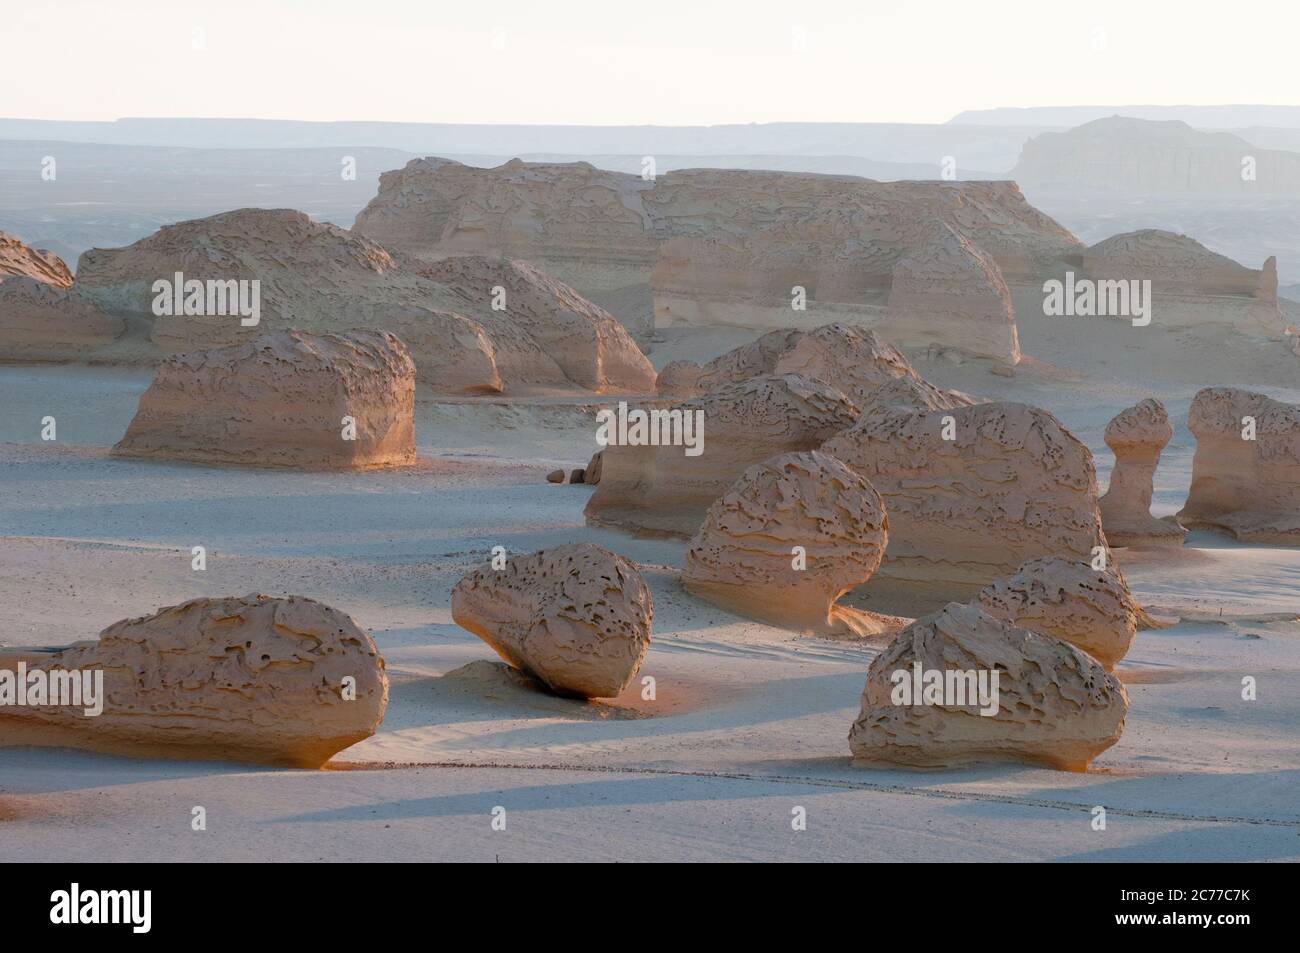 Desert landforms formed by wind erosion at Wadi El Hitan, Valley of the Fossils Stock Photo